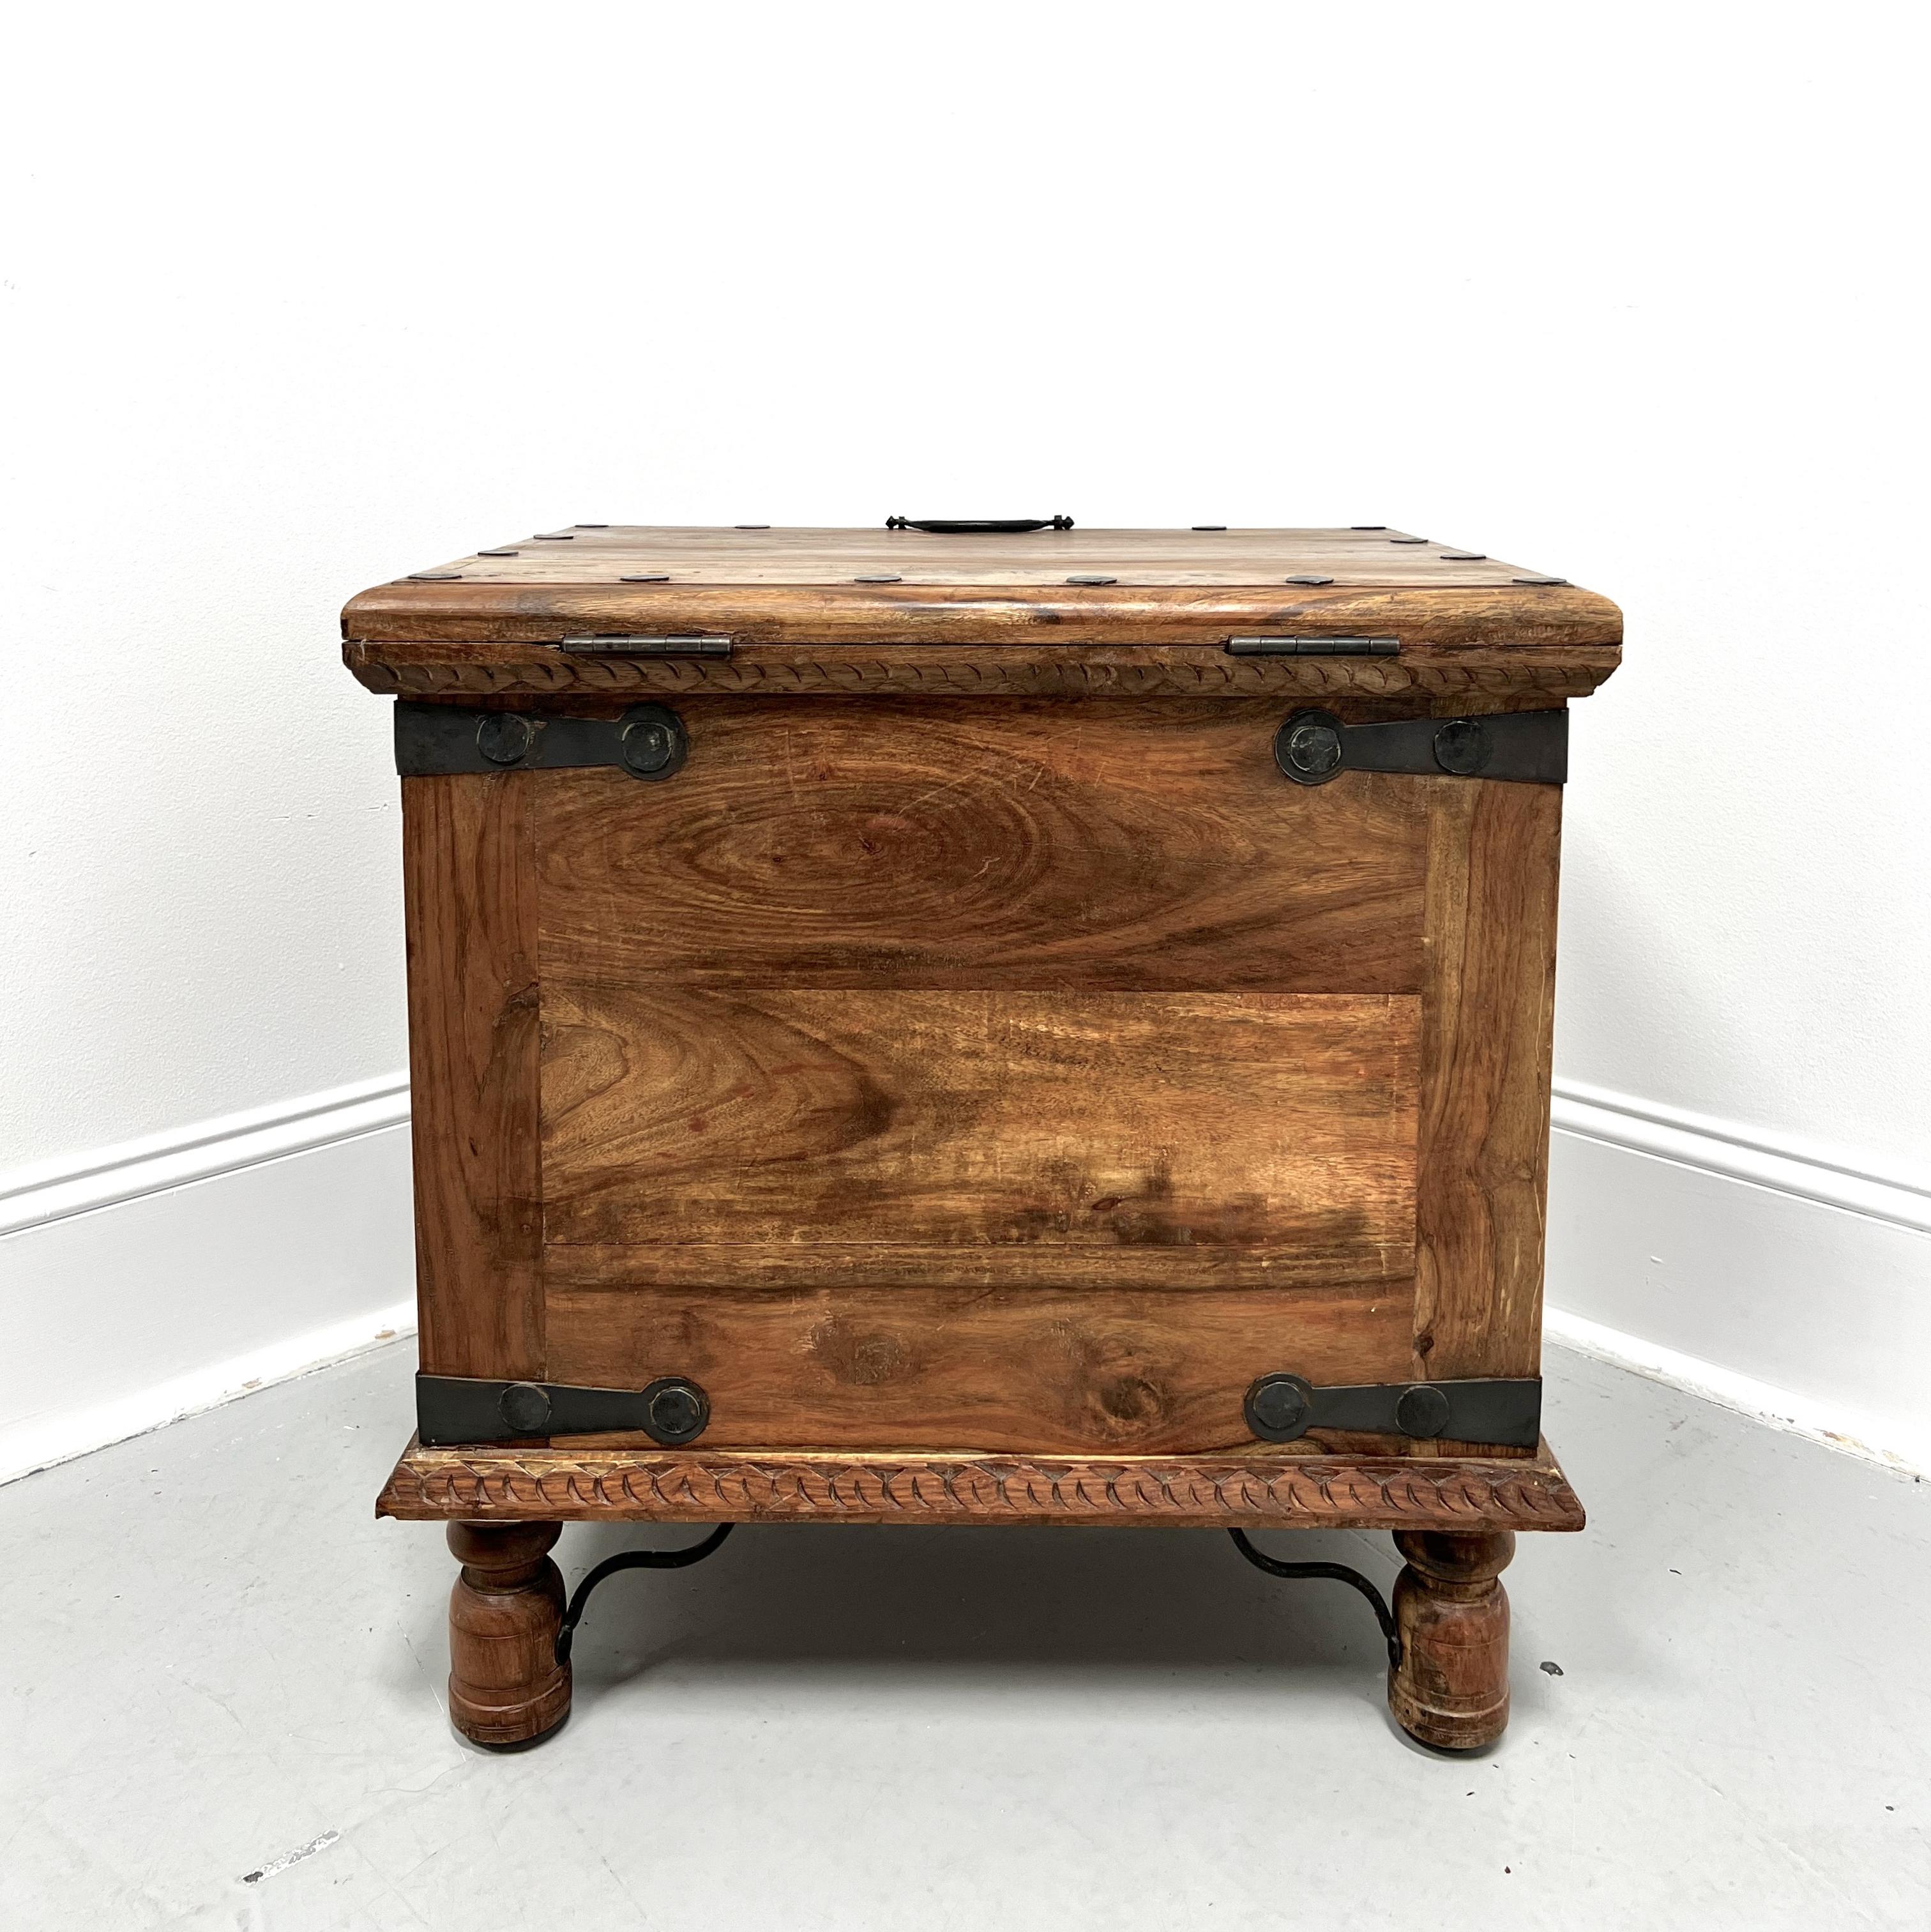 American Vintage 20th Century Wood & Metal Rustic Storage Trunk Accent Table For Sale